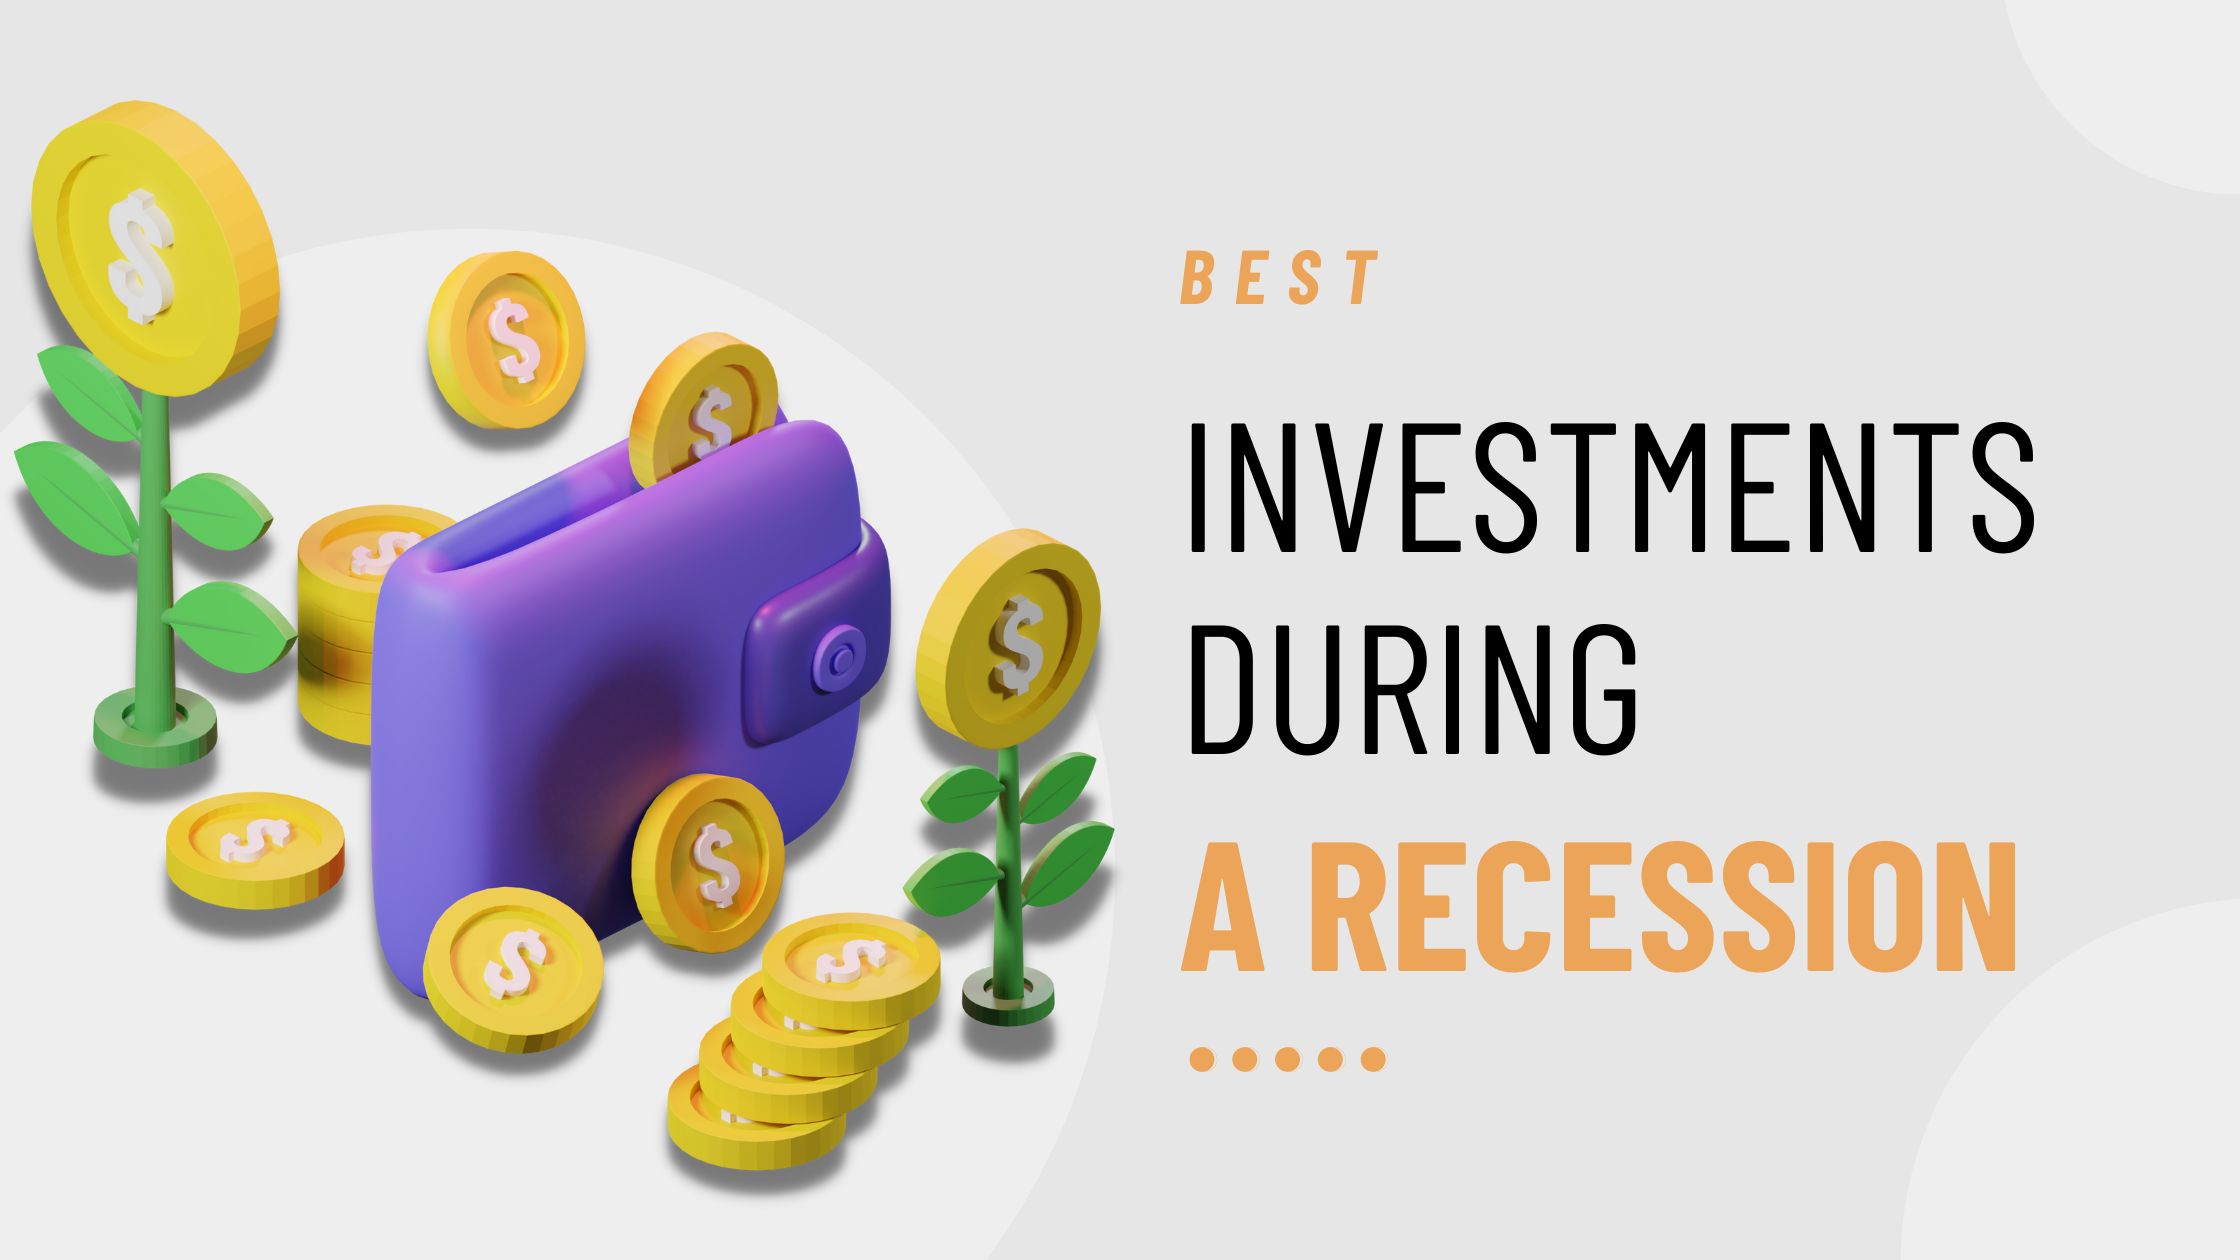 Best Investments During a Recession